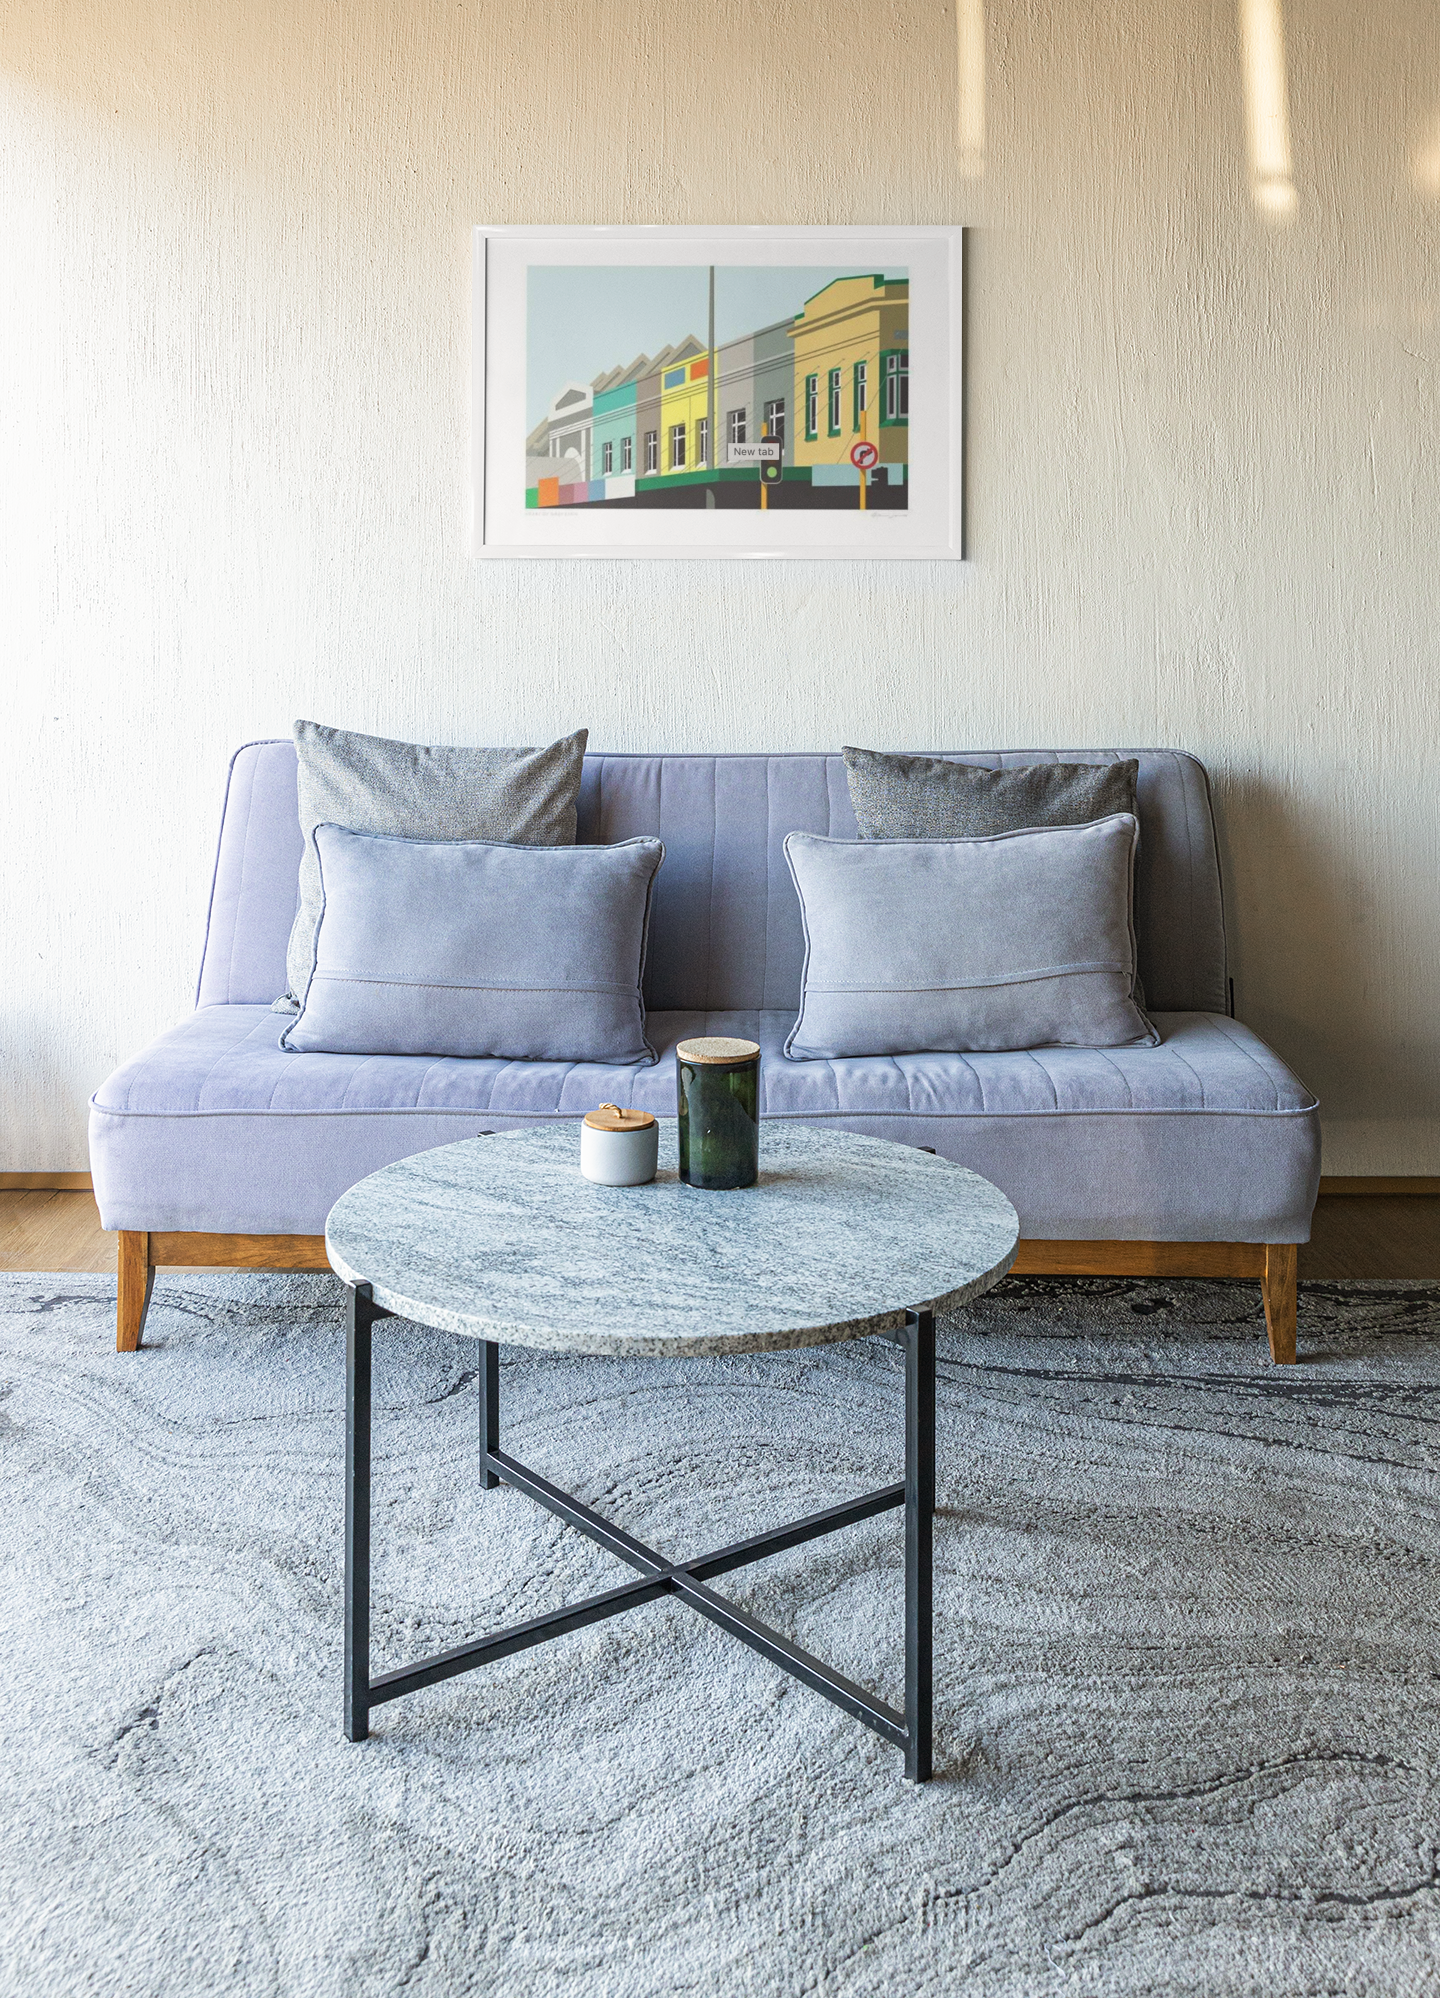 A cozy and minimalist living room setup featuring the Heart of Grey Lynn couch by Glenn Jones with plush cushions, a circular marble-top coffee table with a candle on it, all placed on a soft, textured rug. The scene is